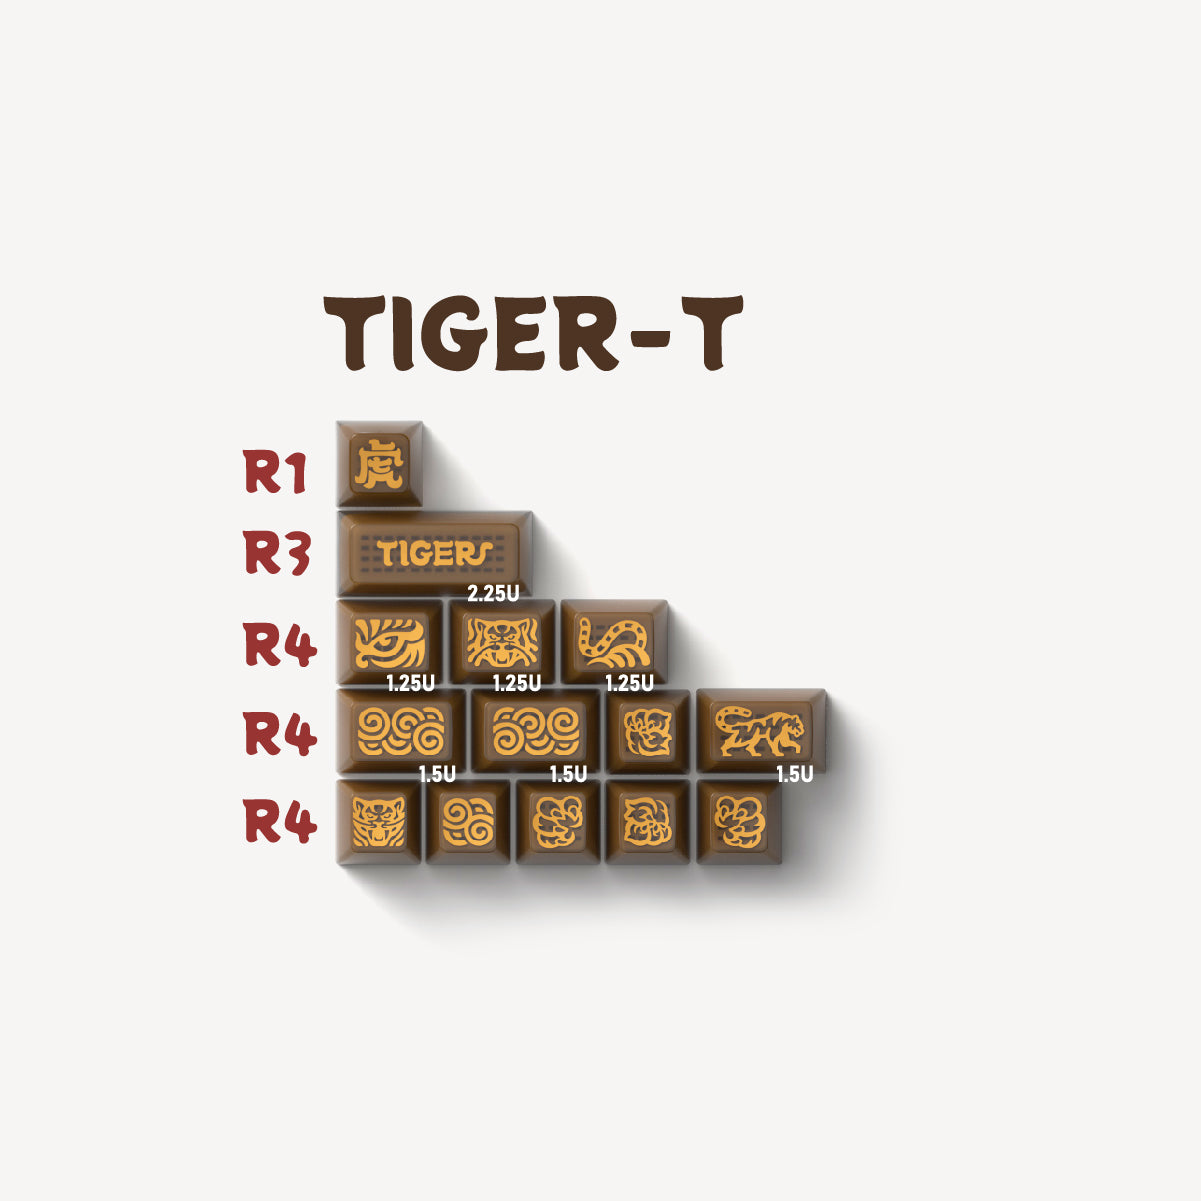 [Group Buy Closed] DOMIKEY X GLOVE TIGER SA PROFILE ABS DOUBLESHOT KEYCAPS